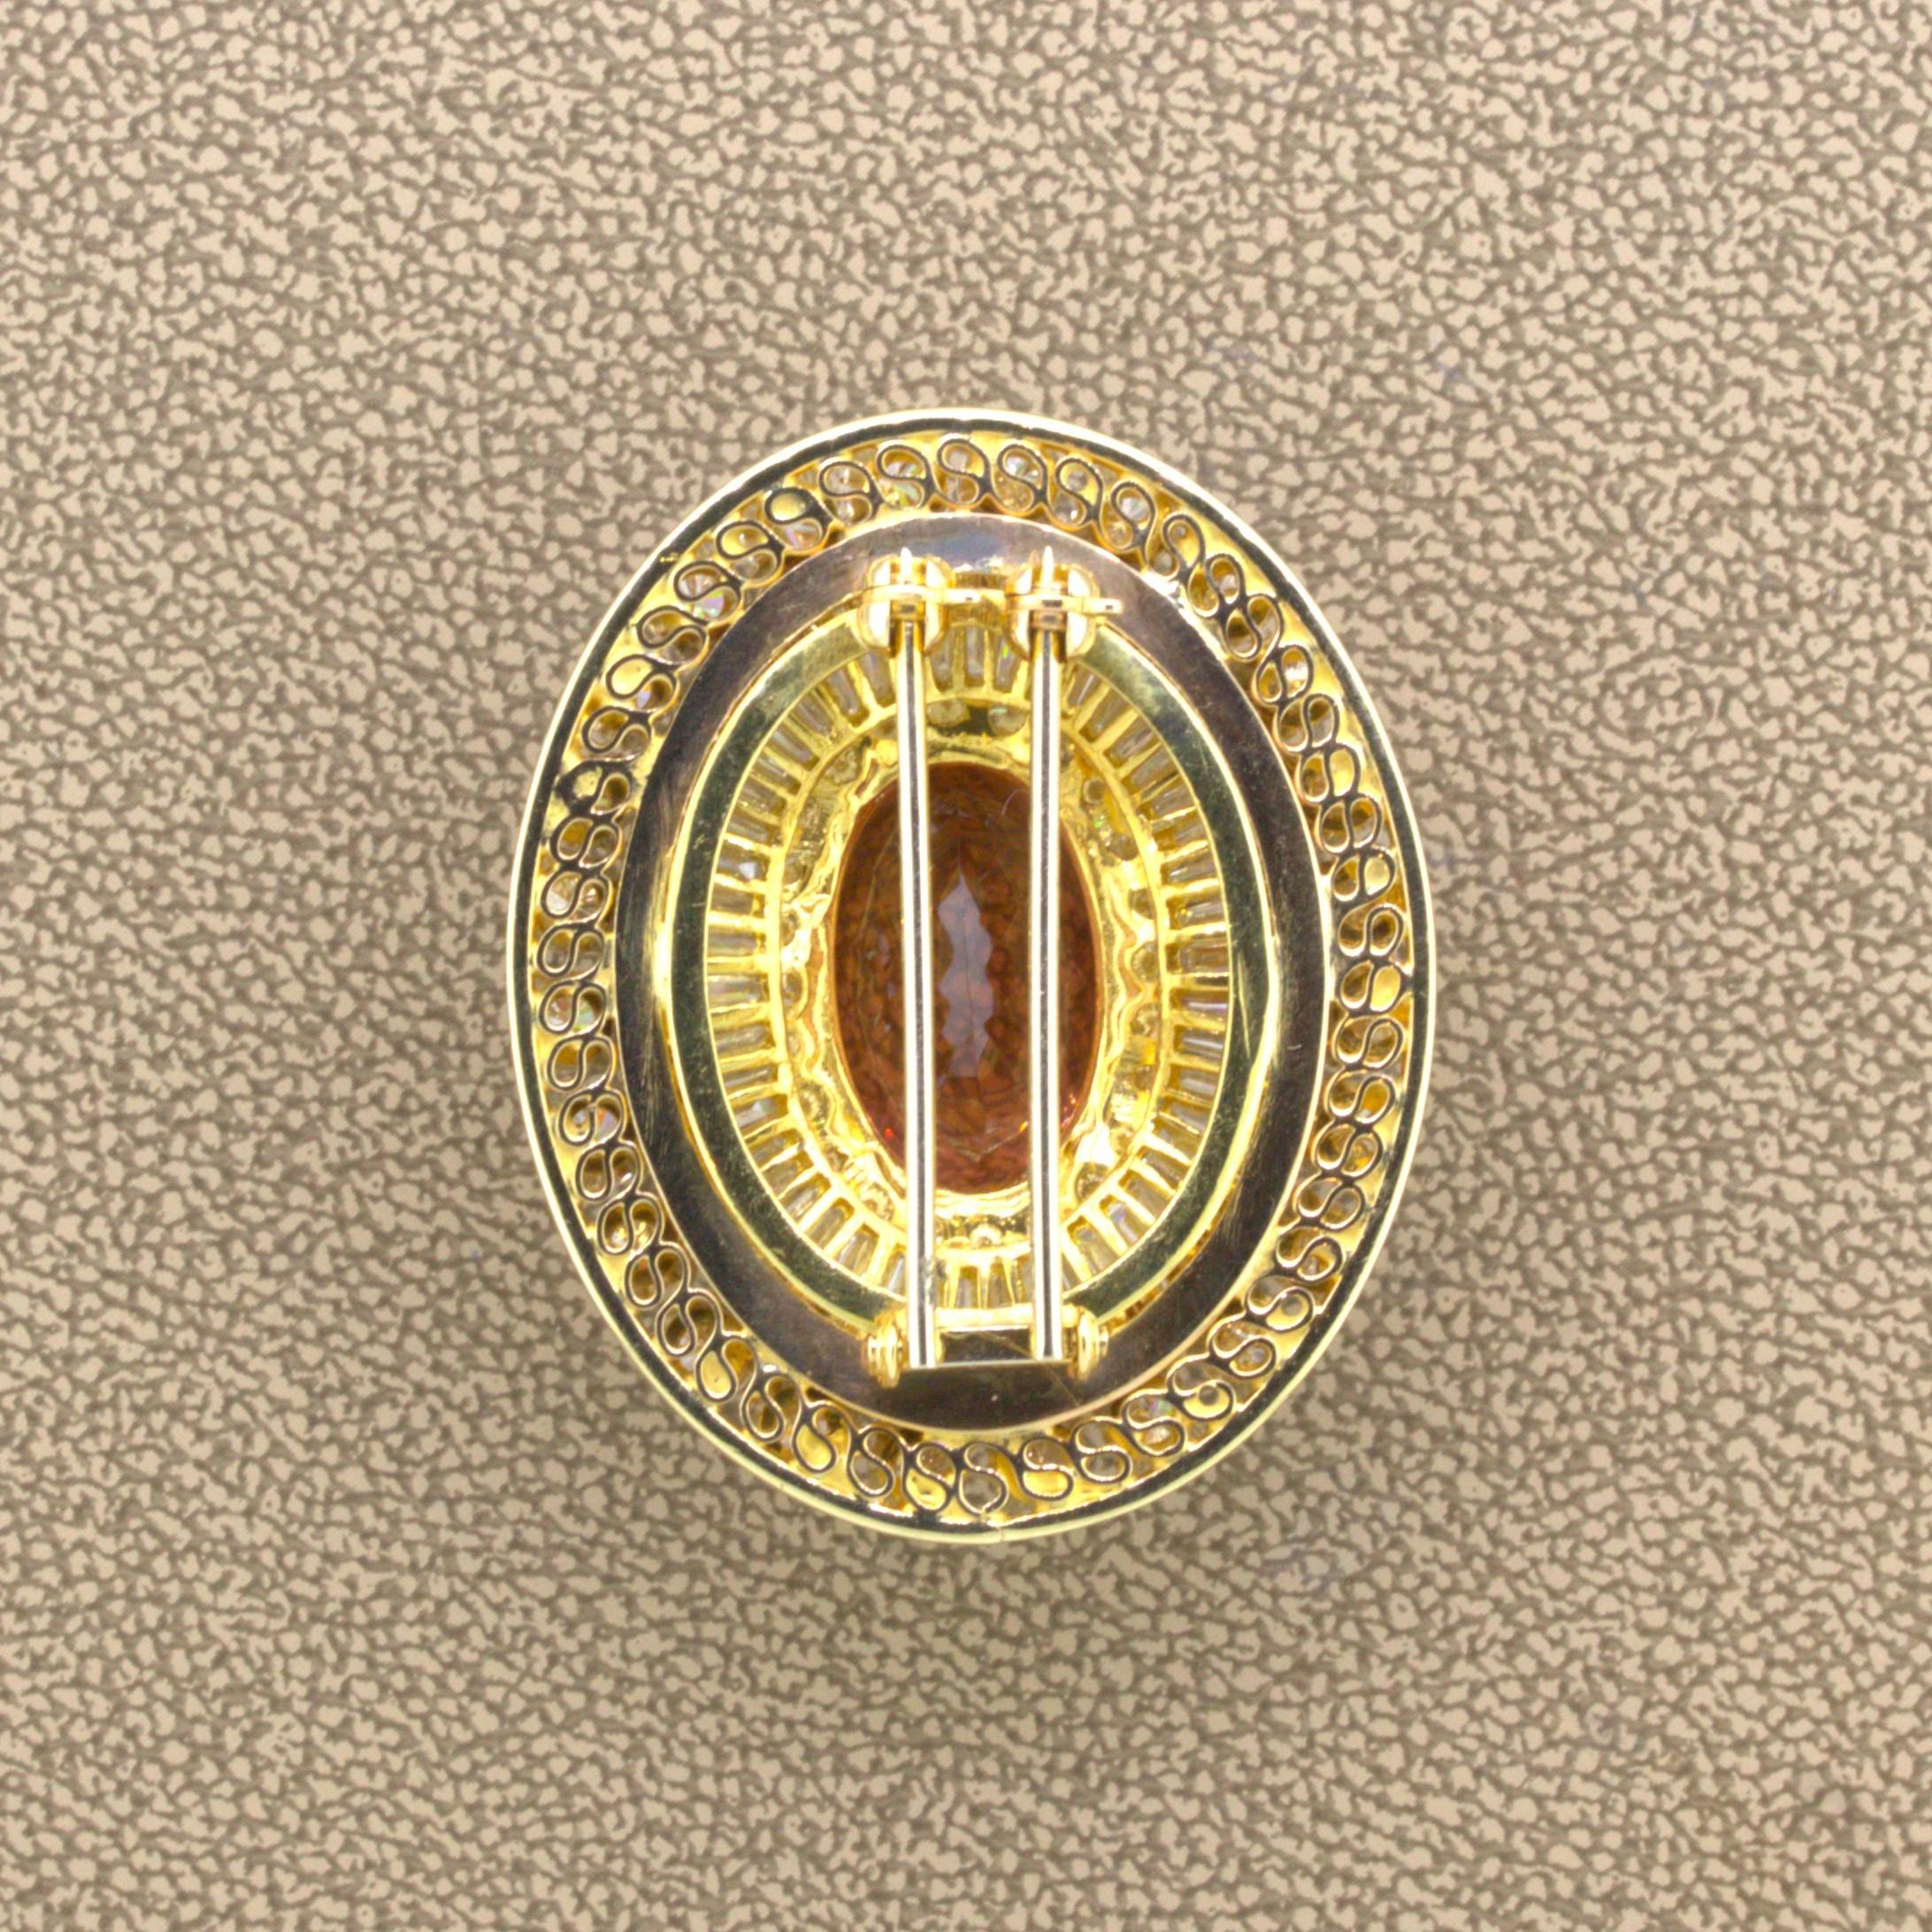 Superb Imperial Topaz Diamond 18K Yellow Gold Brooch, AGL Certified For Sale 3